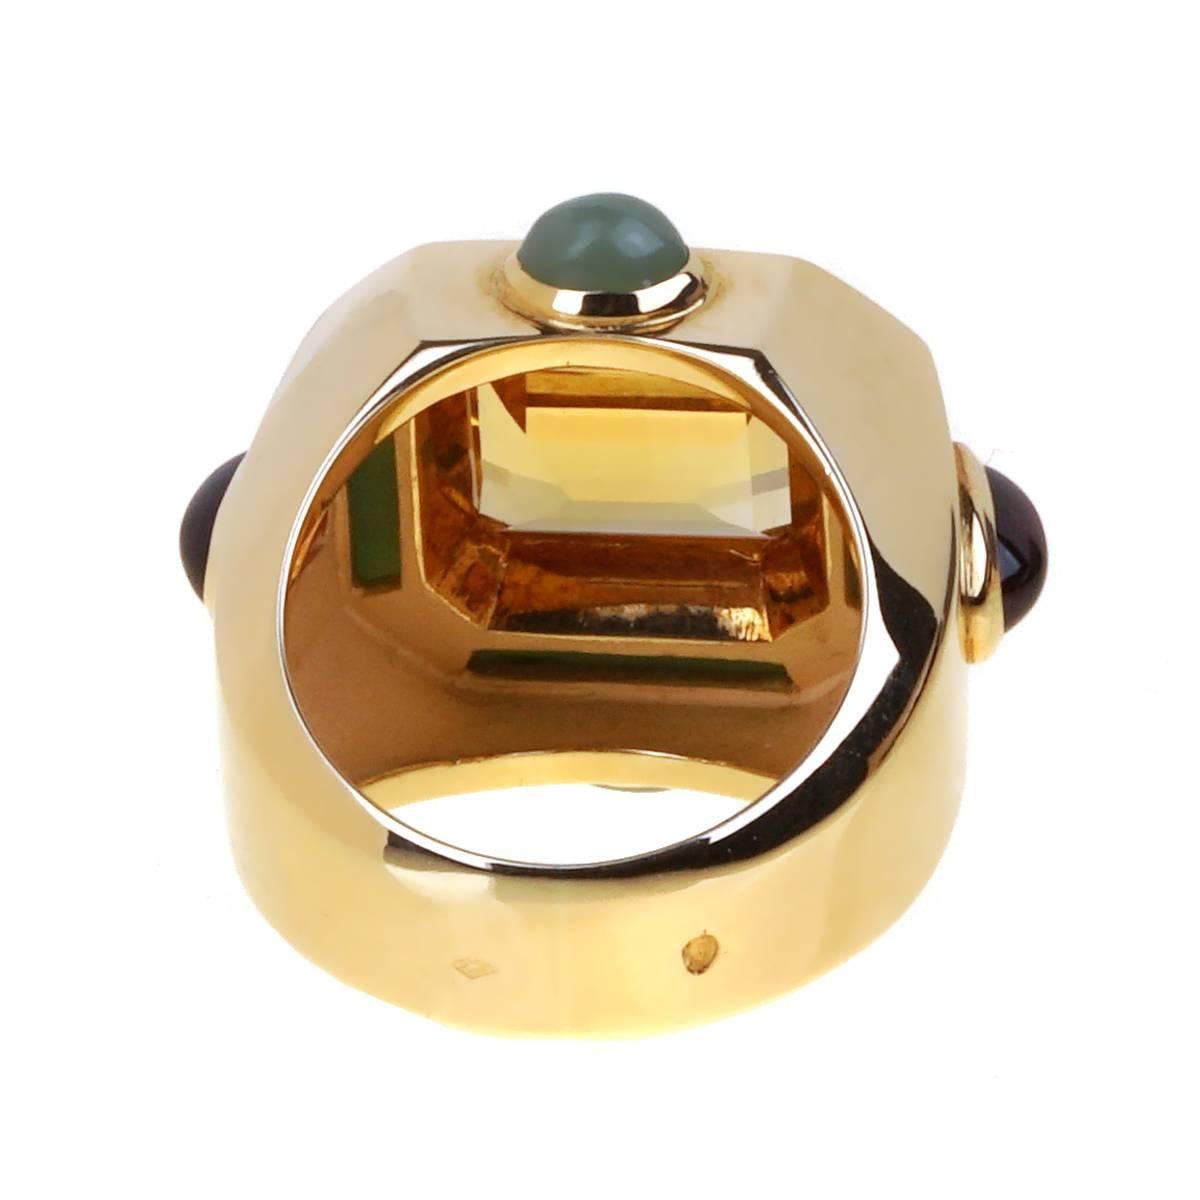 A chic Chanel cocktail ring featuring a golden emerald cut citrine, carved jade in 18k yellow gold. The ring also showcases 4 cabochon oval cut gemstones. The ring measures .85